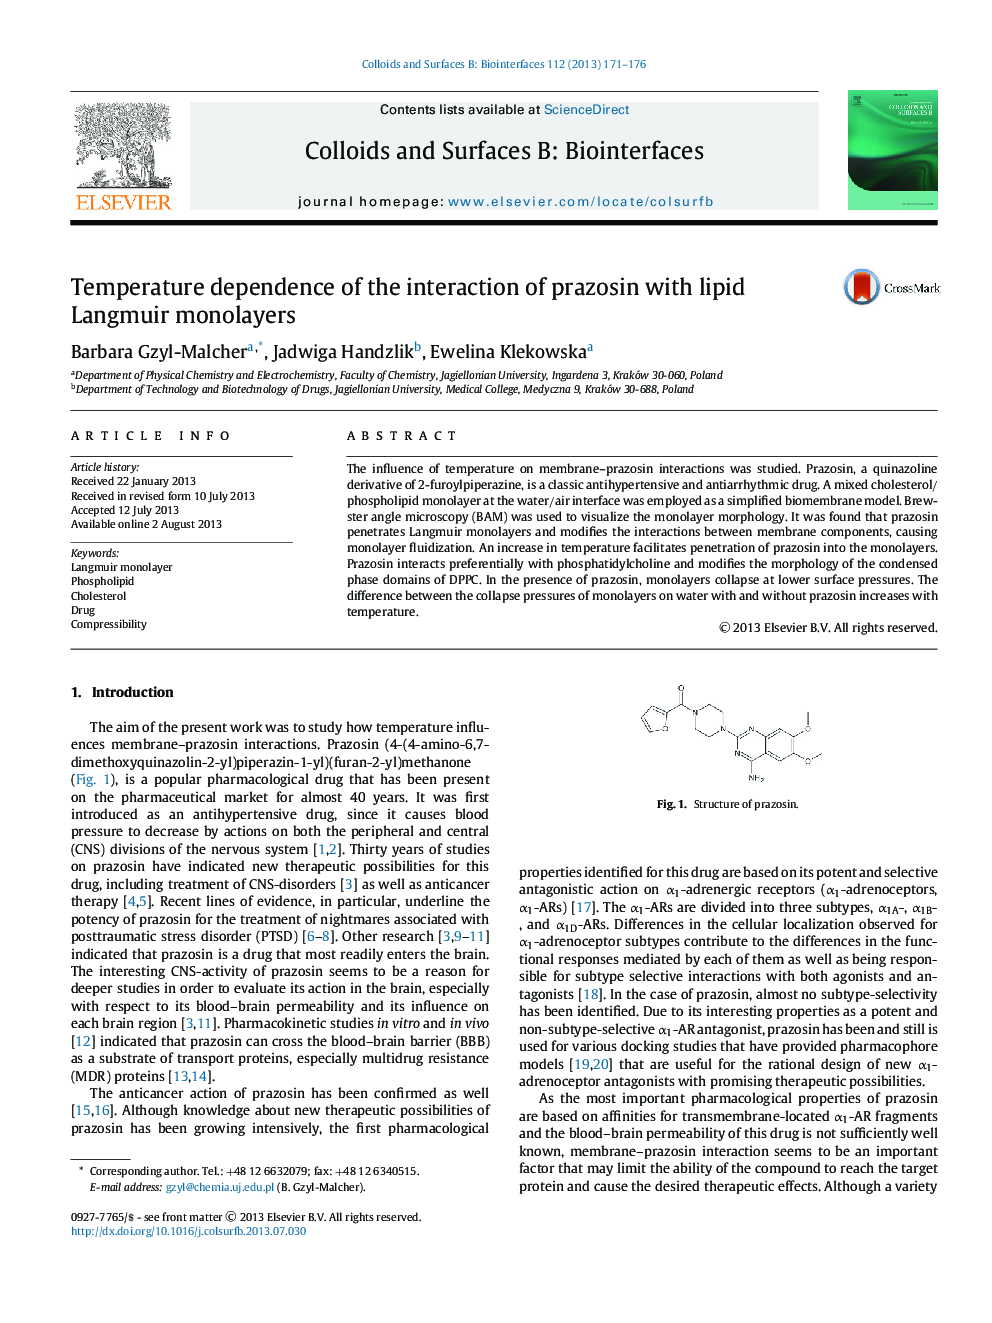 Temperature dependence of the interaction of prazosin with lipid Langmuir monolayers